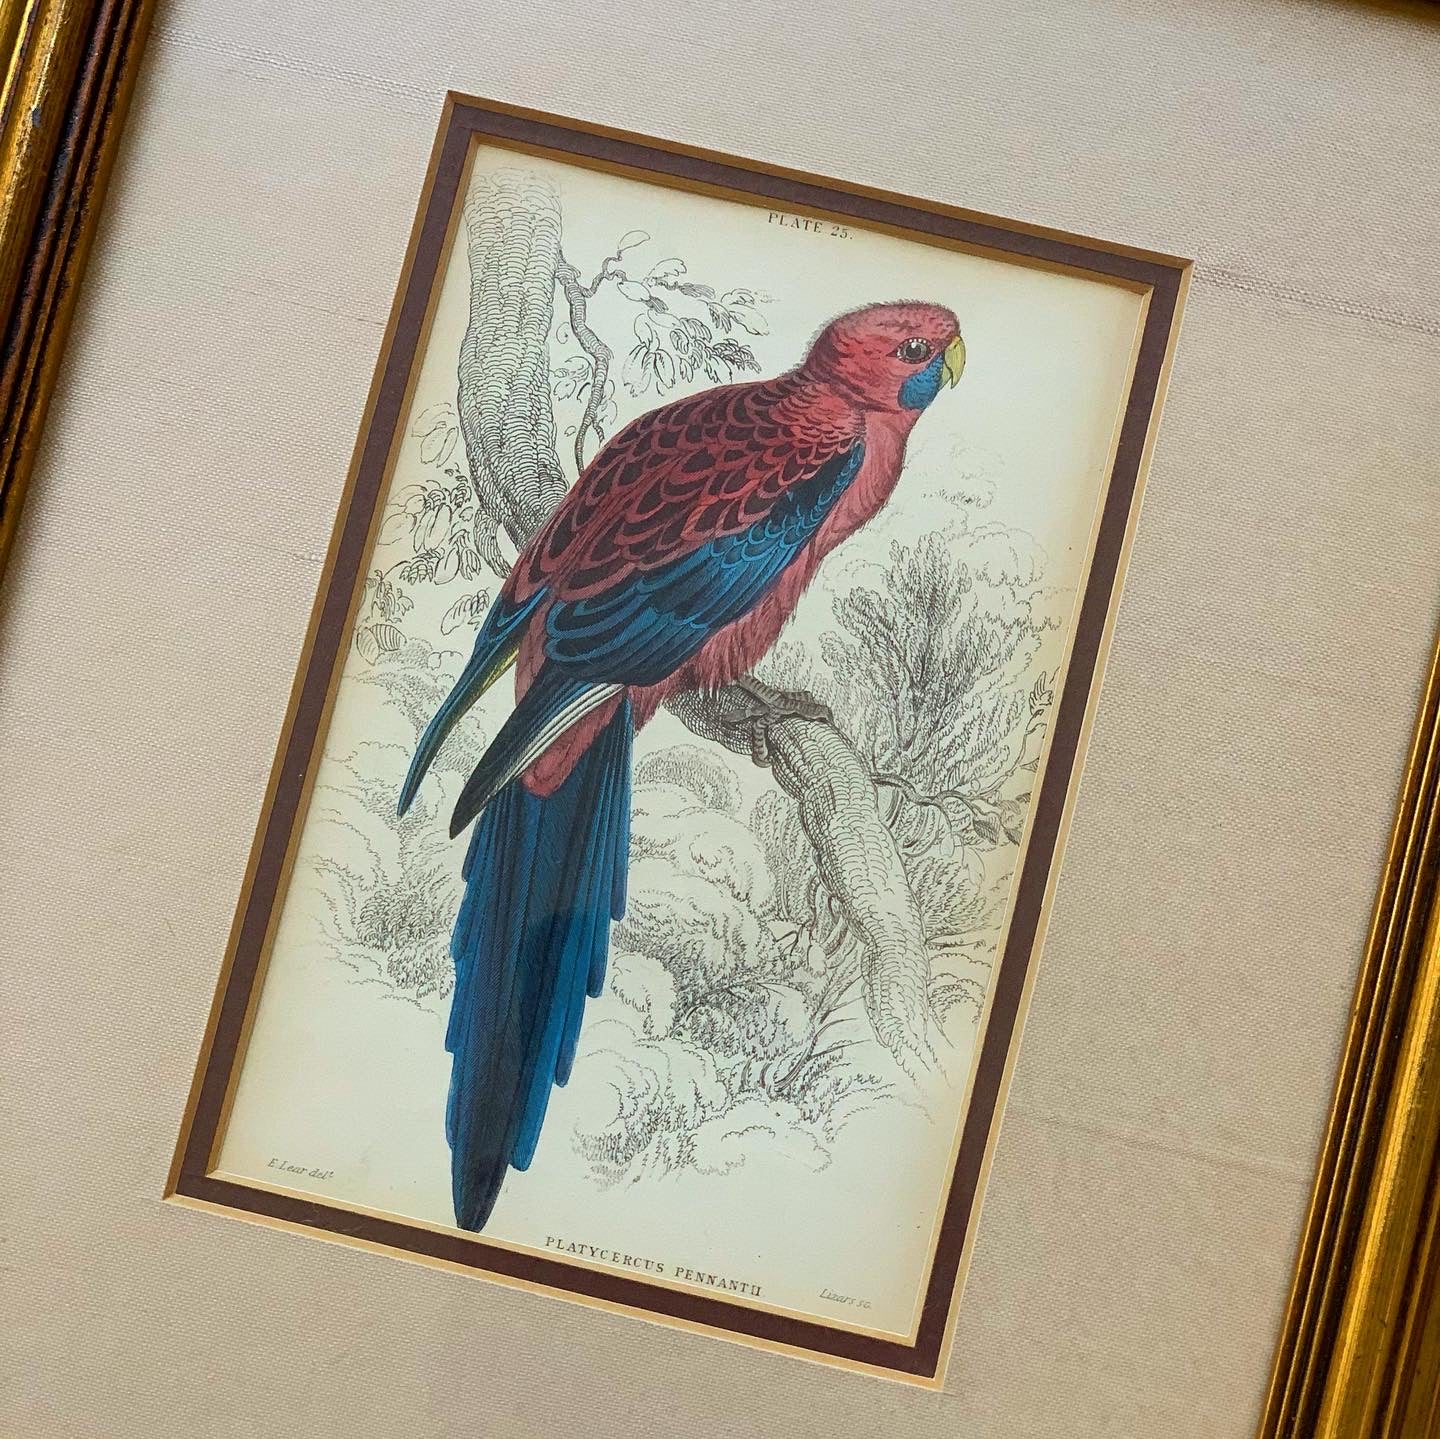 Pennantian Broad Tail Parrot (Original Antique 1843 Hand-Colored Engraving)